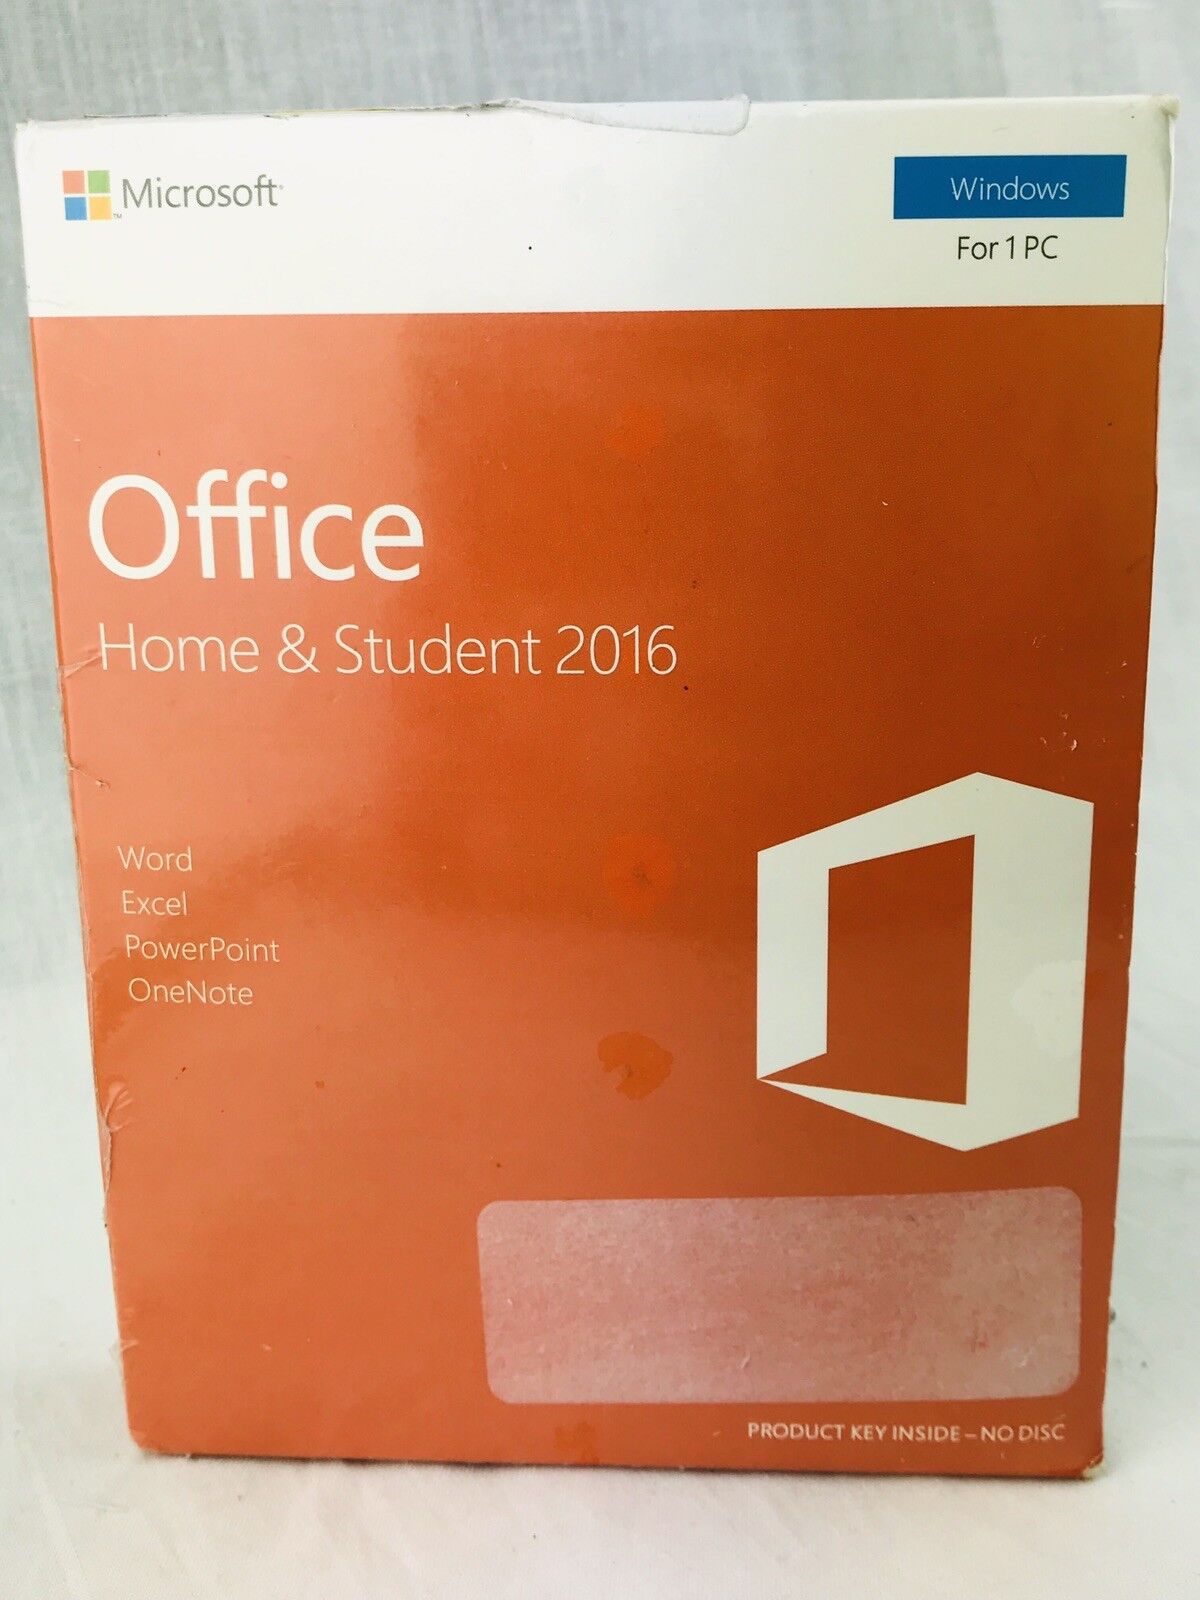 Microsoft Office Home & Student 2016 Product Key For Windows 1 PC Word Excel PP